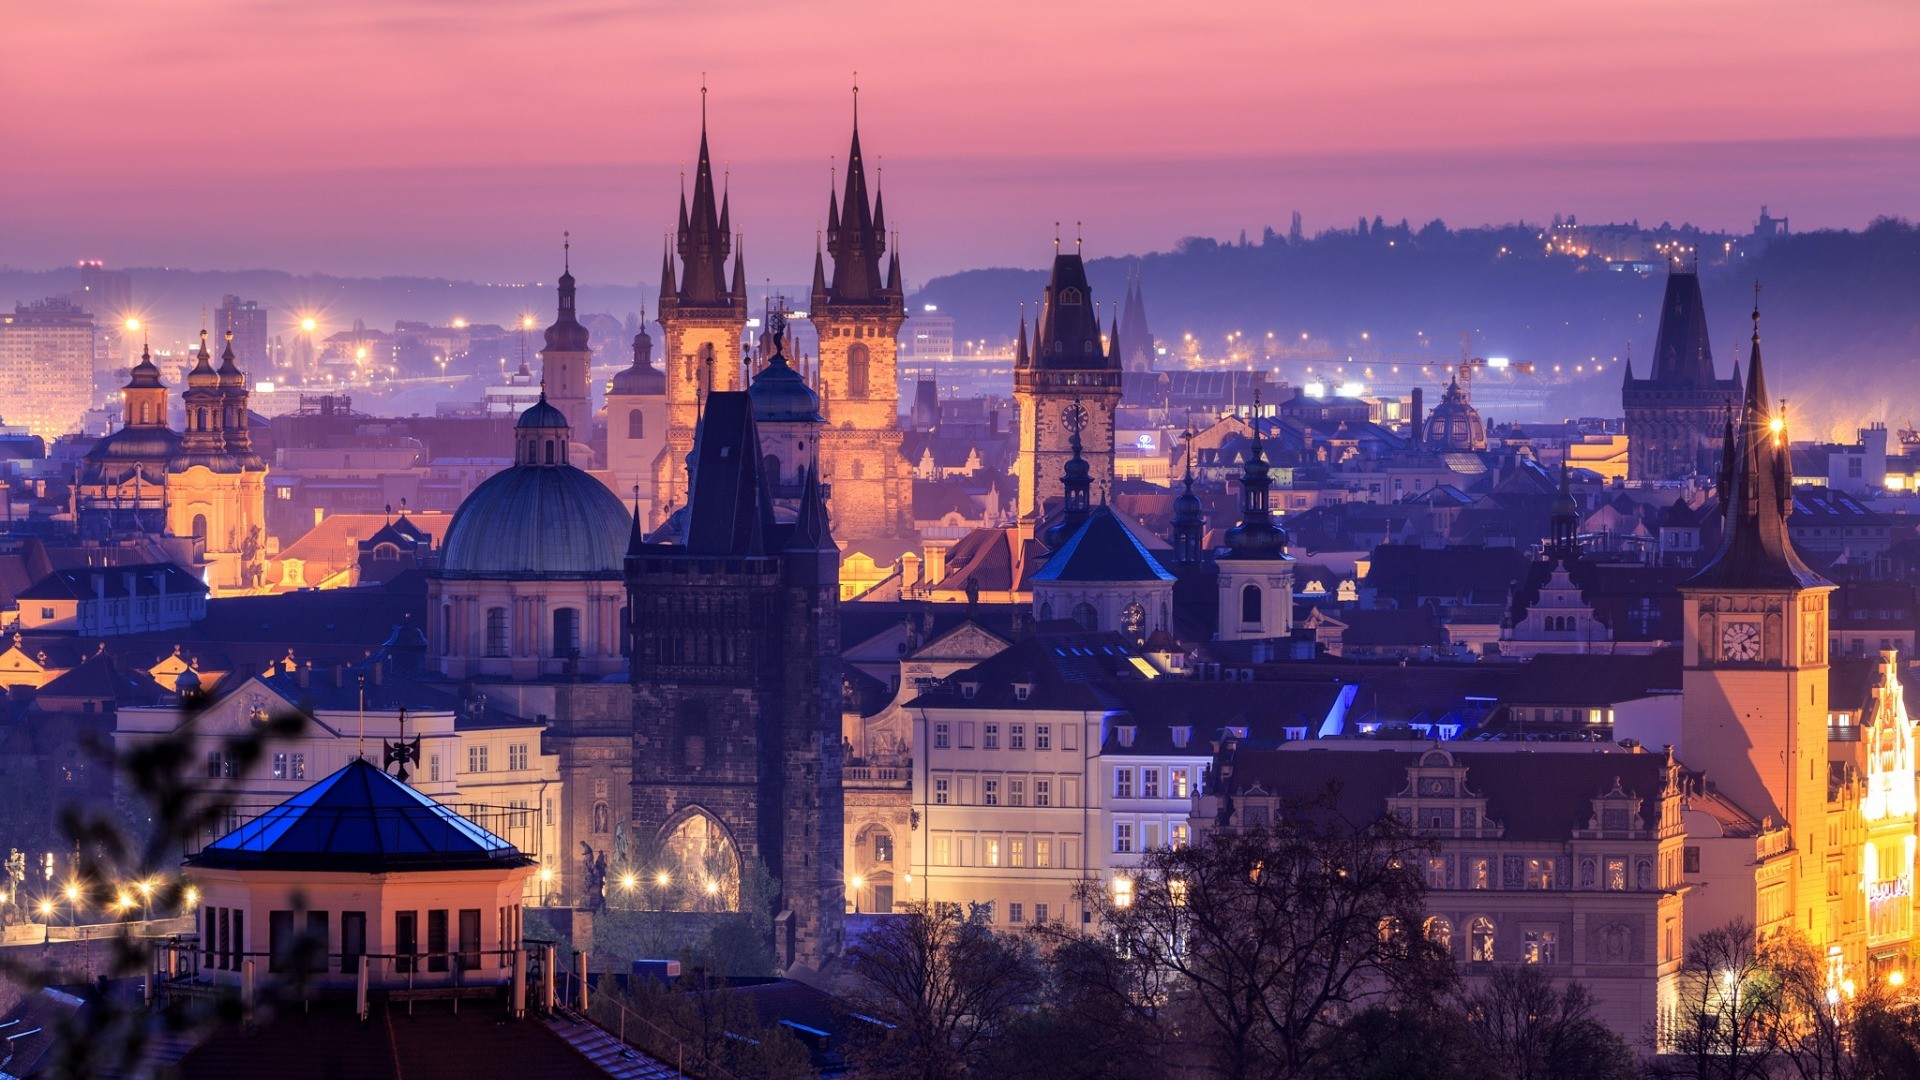 architecture, Building, Evening, Czech Republic, Prague, Cathedral, Church, Tower, Sunset, Lights, Old building, Ancient, City, Cityscape Wallpaper